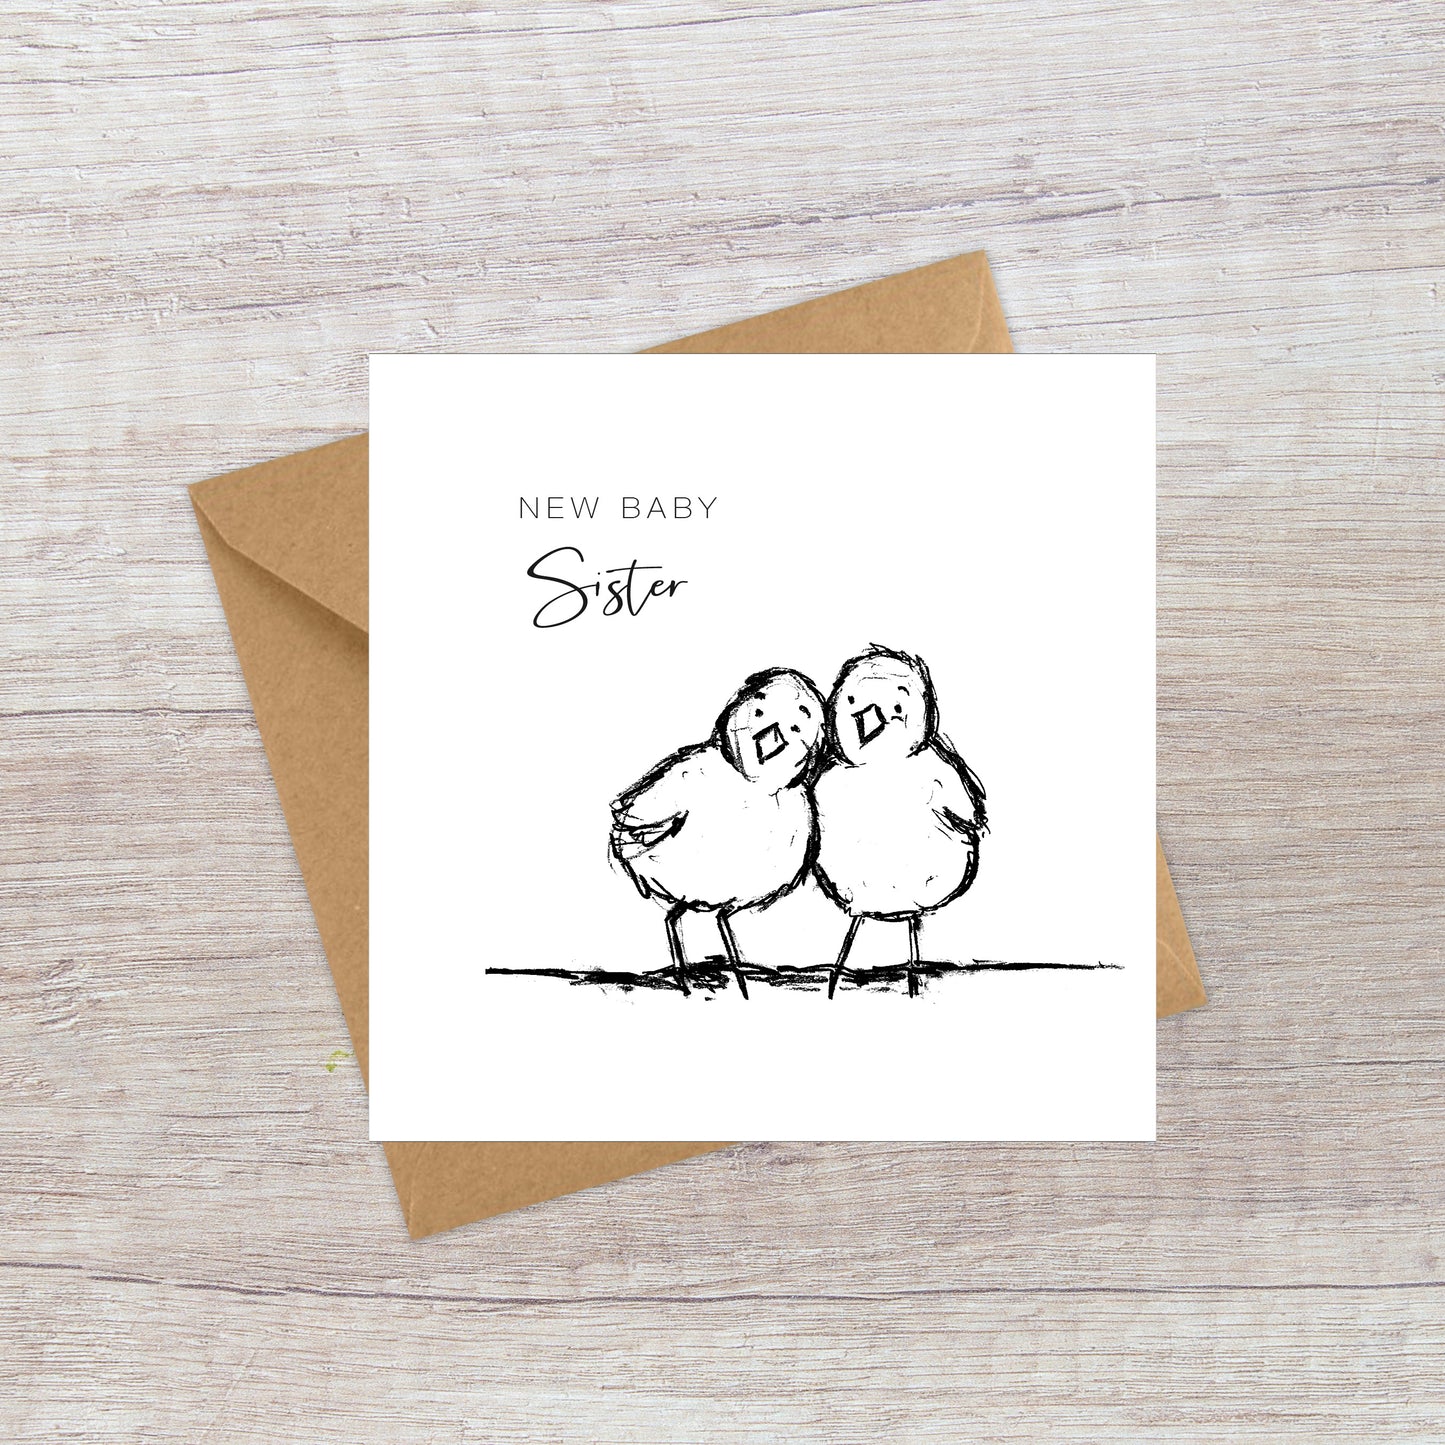 New Baby Sister Card